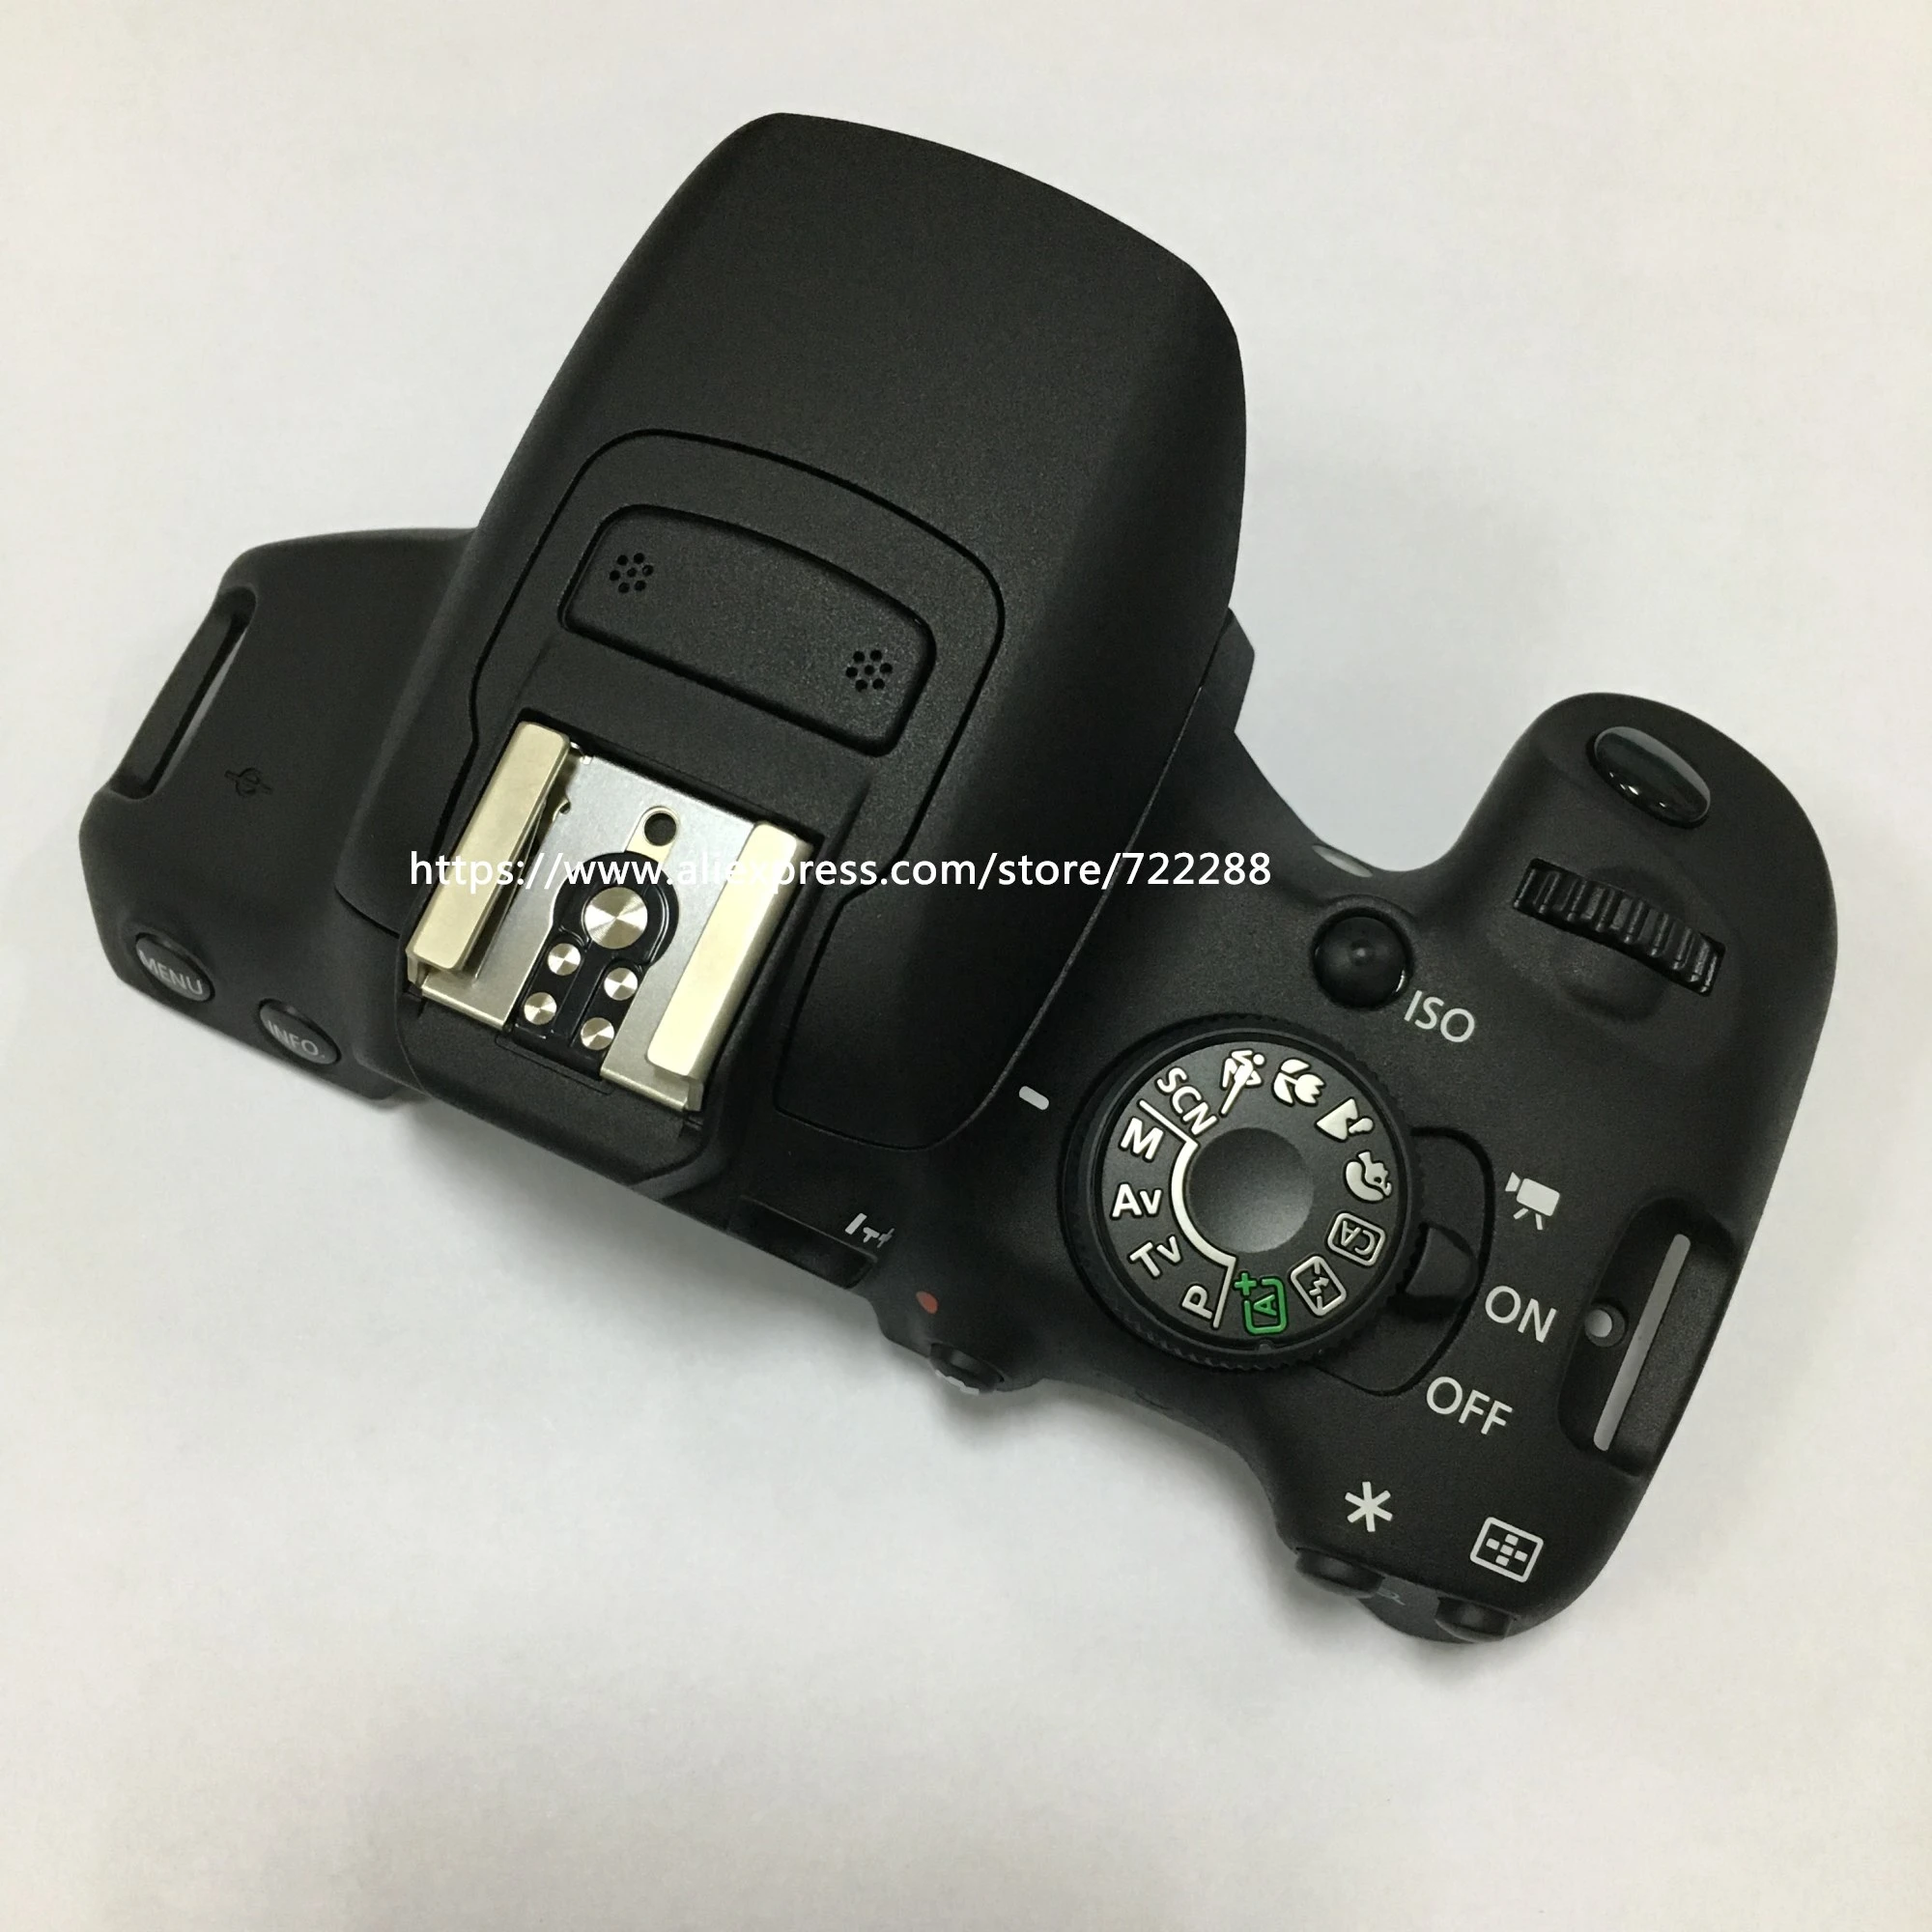 Repair Parts For Canon EOS 700D Rebel T5i Kiss X7i Top Cover Case Ass'y  with Mode Dial Shutter Button Flash Unit CG2-4271-000